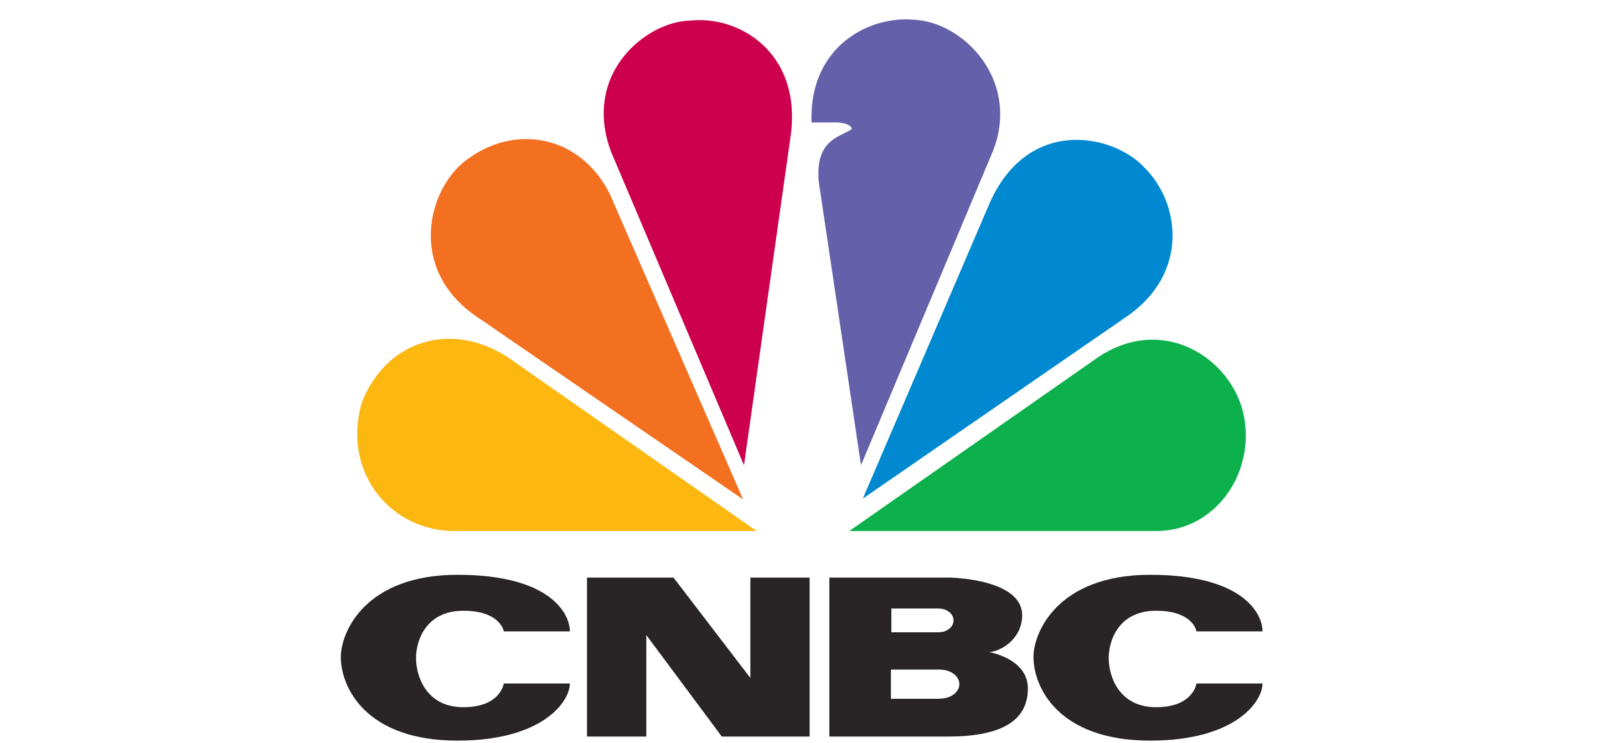 The CNBC logo featuring a multicolored peacock above the acronym "CNBC" in bold, black letters.